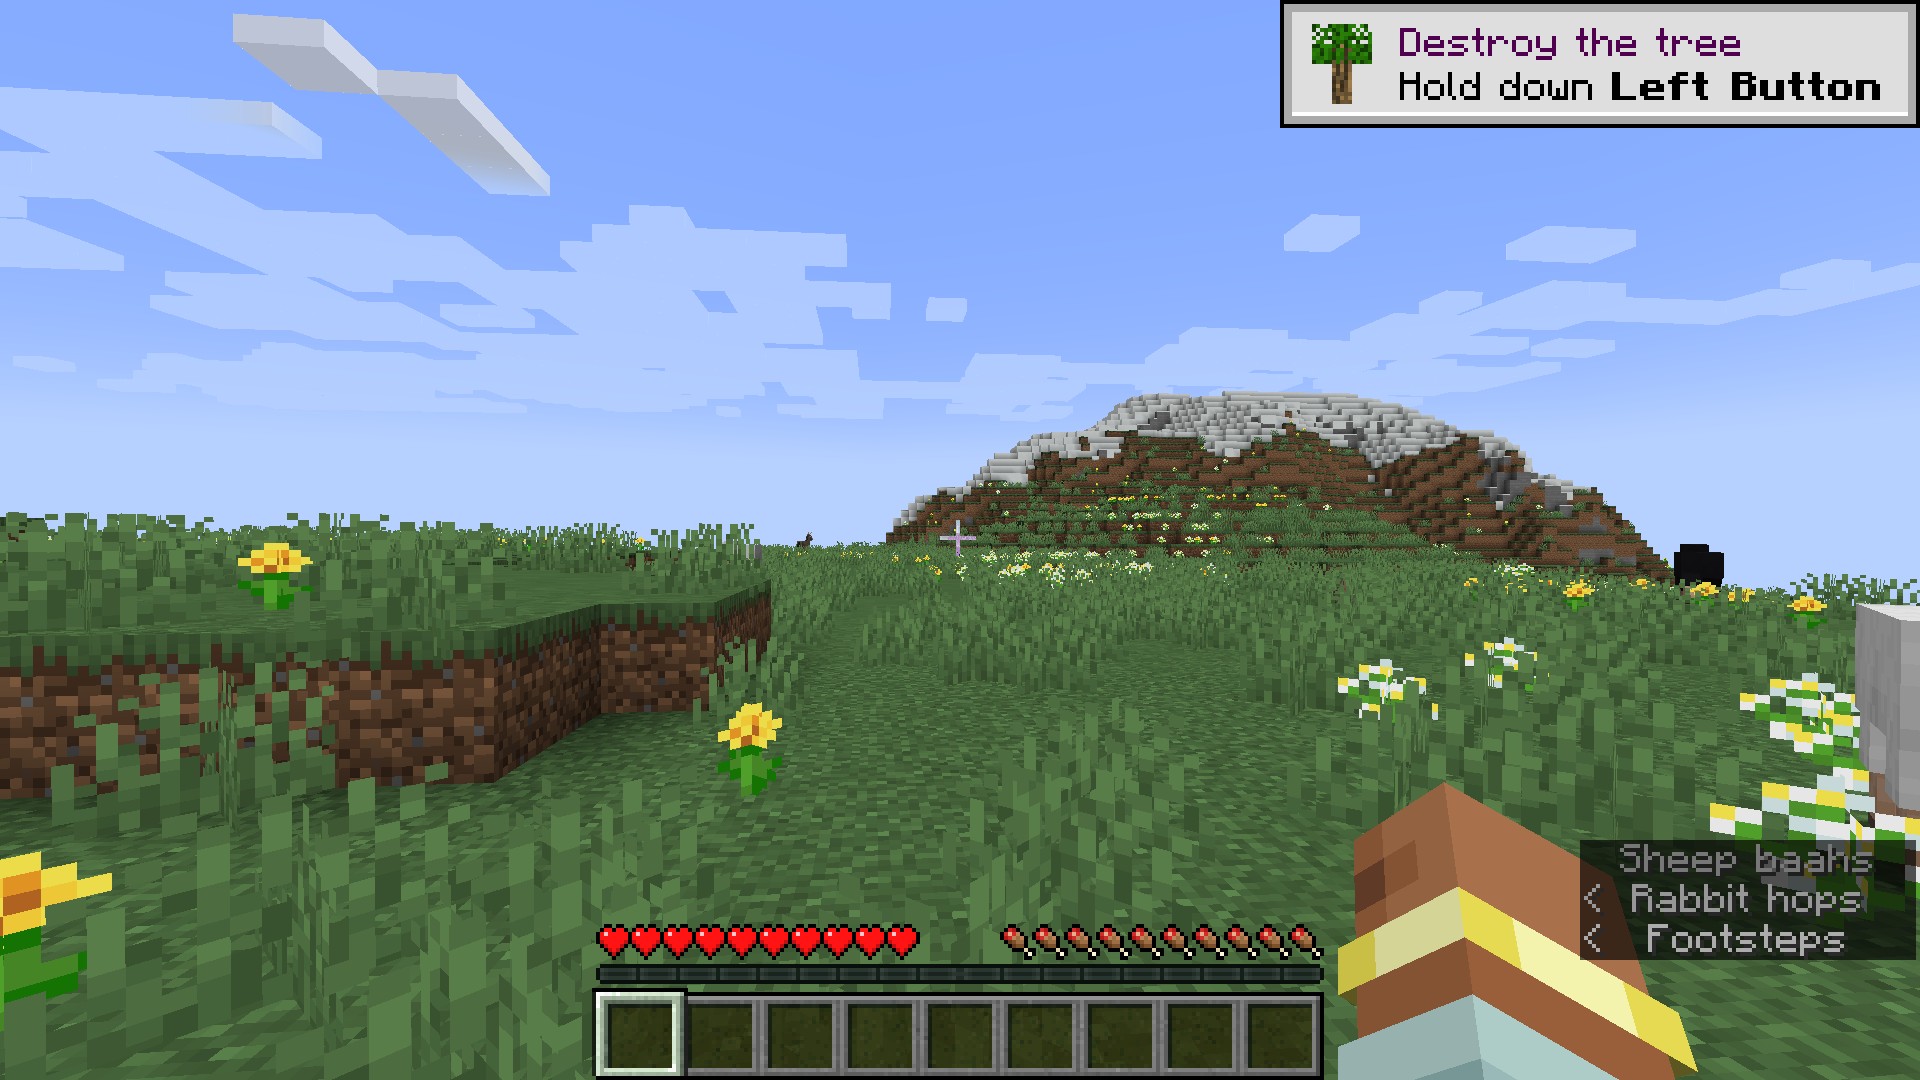 An image from Minecraft of the meadow biome with a mountain in the distance. The HUD and the player's hand are at the bottom of the screen. Captions at the right-hand side of the screen show sounds, including a sheep baa-ing and a bunny hopping.